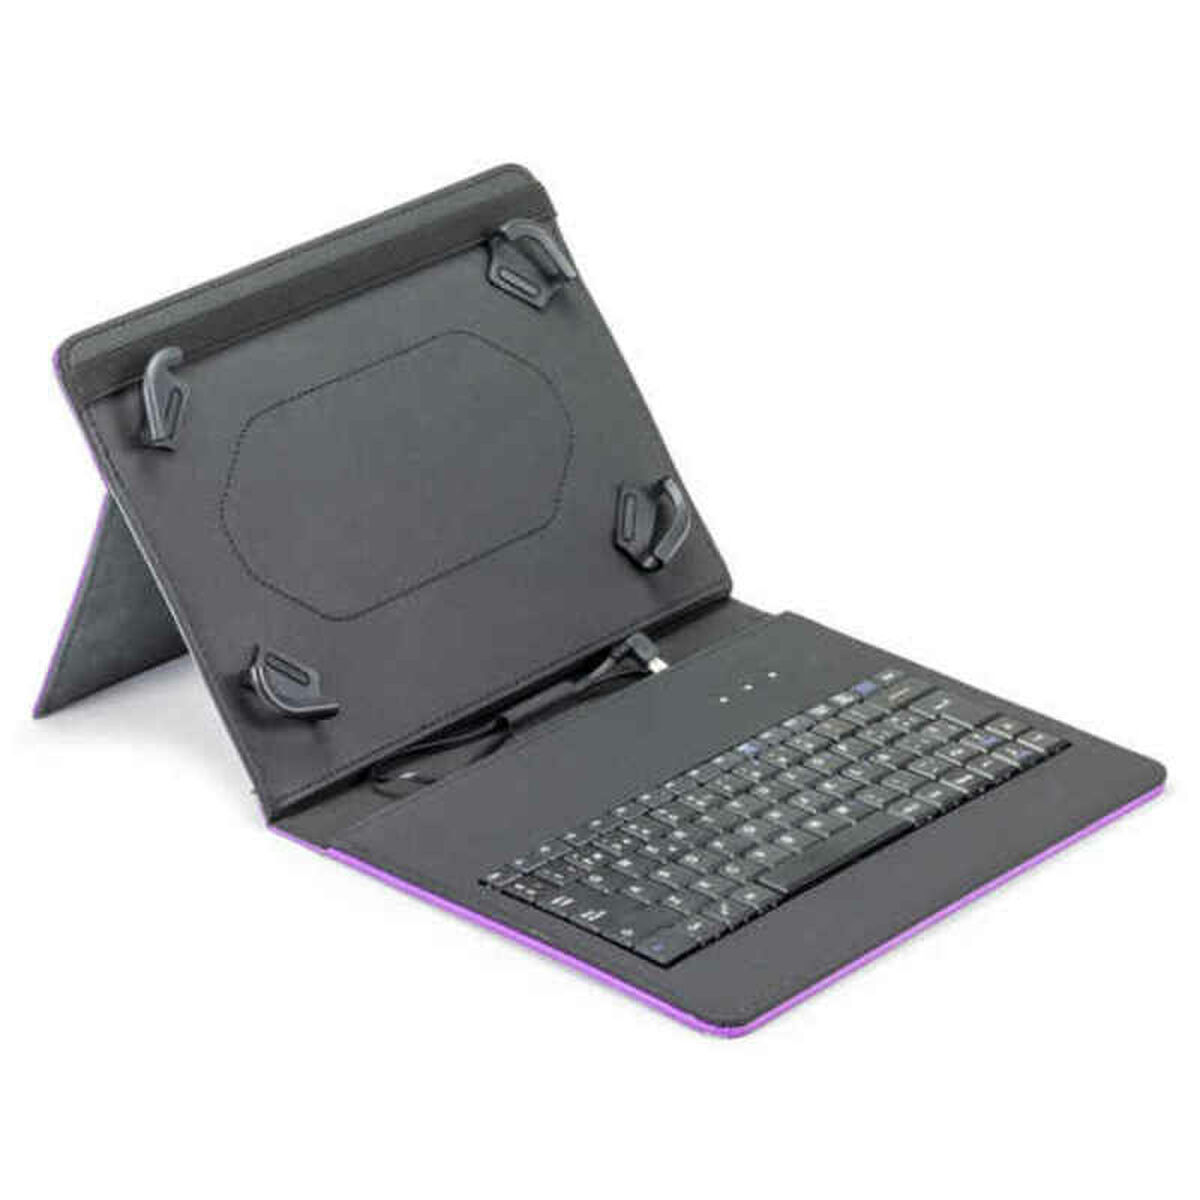 Bluetooth Keyboard with Support for Tablet Maillon Technologique MTKEYUSBPR2 9.7"-10.2" Black Spanish Qwerty Purple Spanish